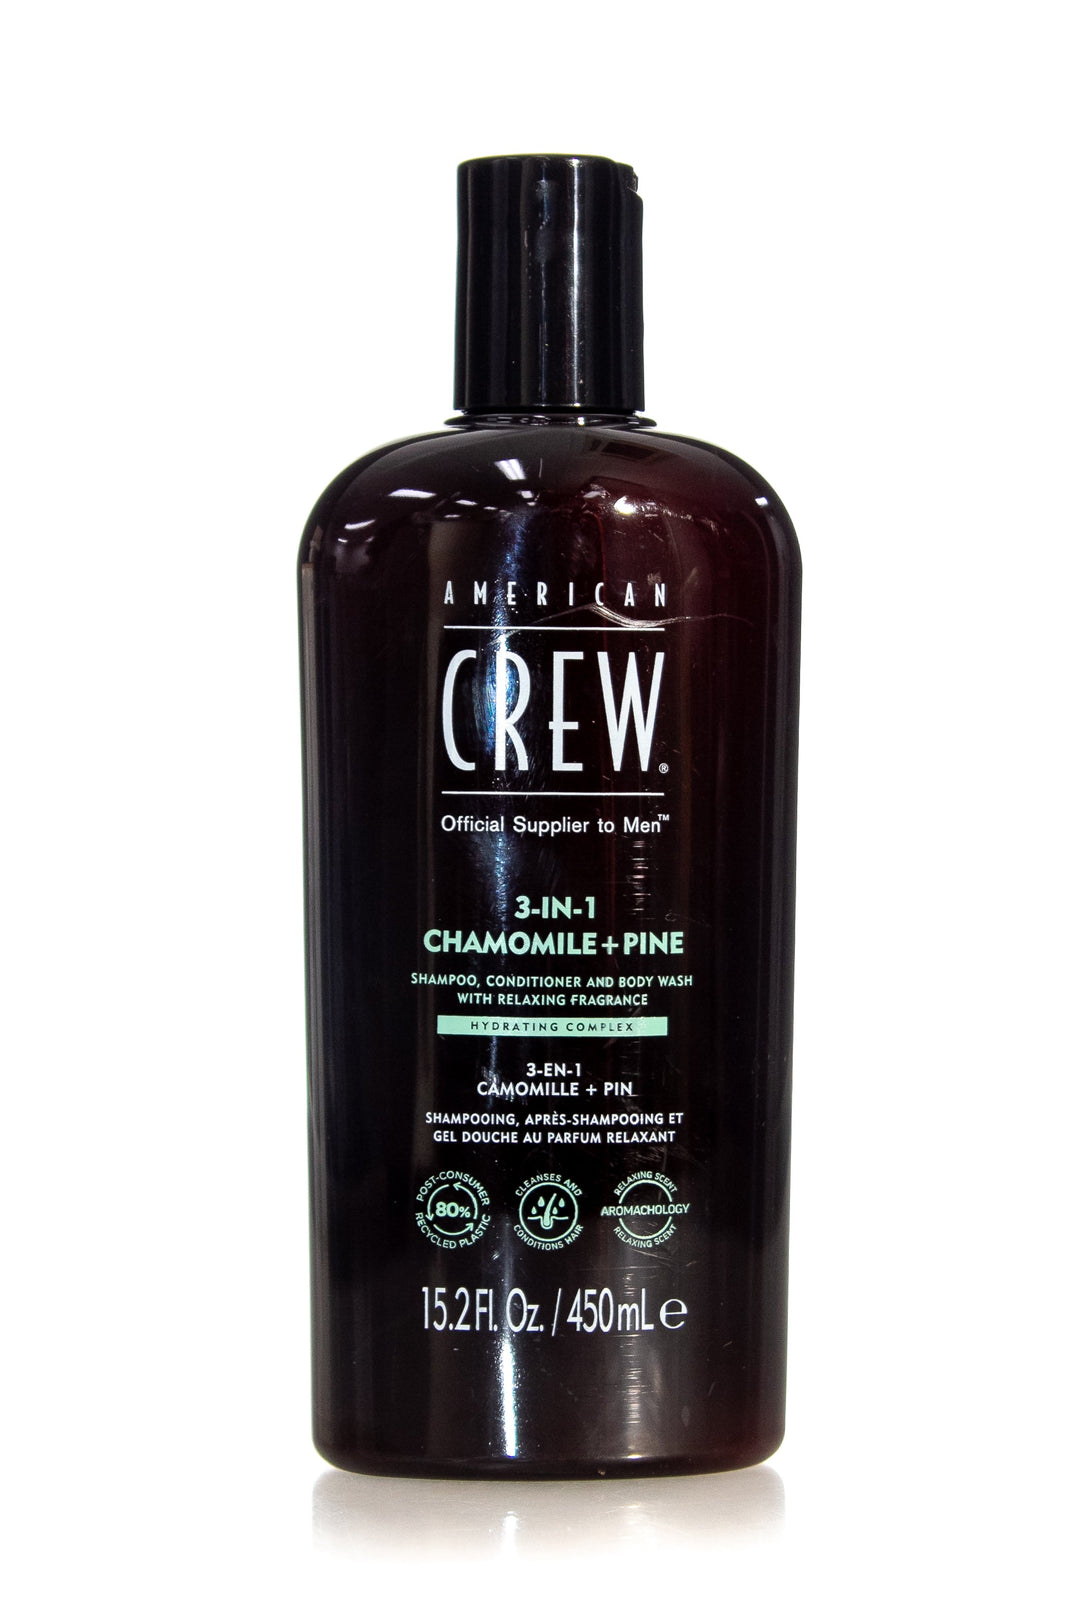 AMERICAN CREW 3-In-1 Relaxing Shampoo/Conditioner/Body Wash | 450ml